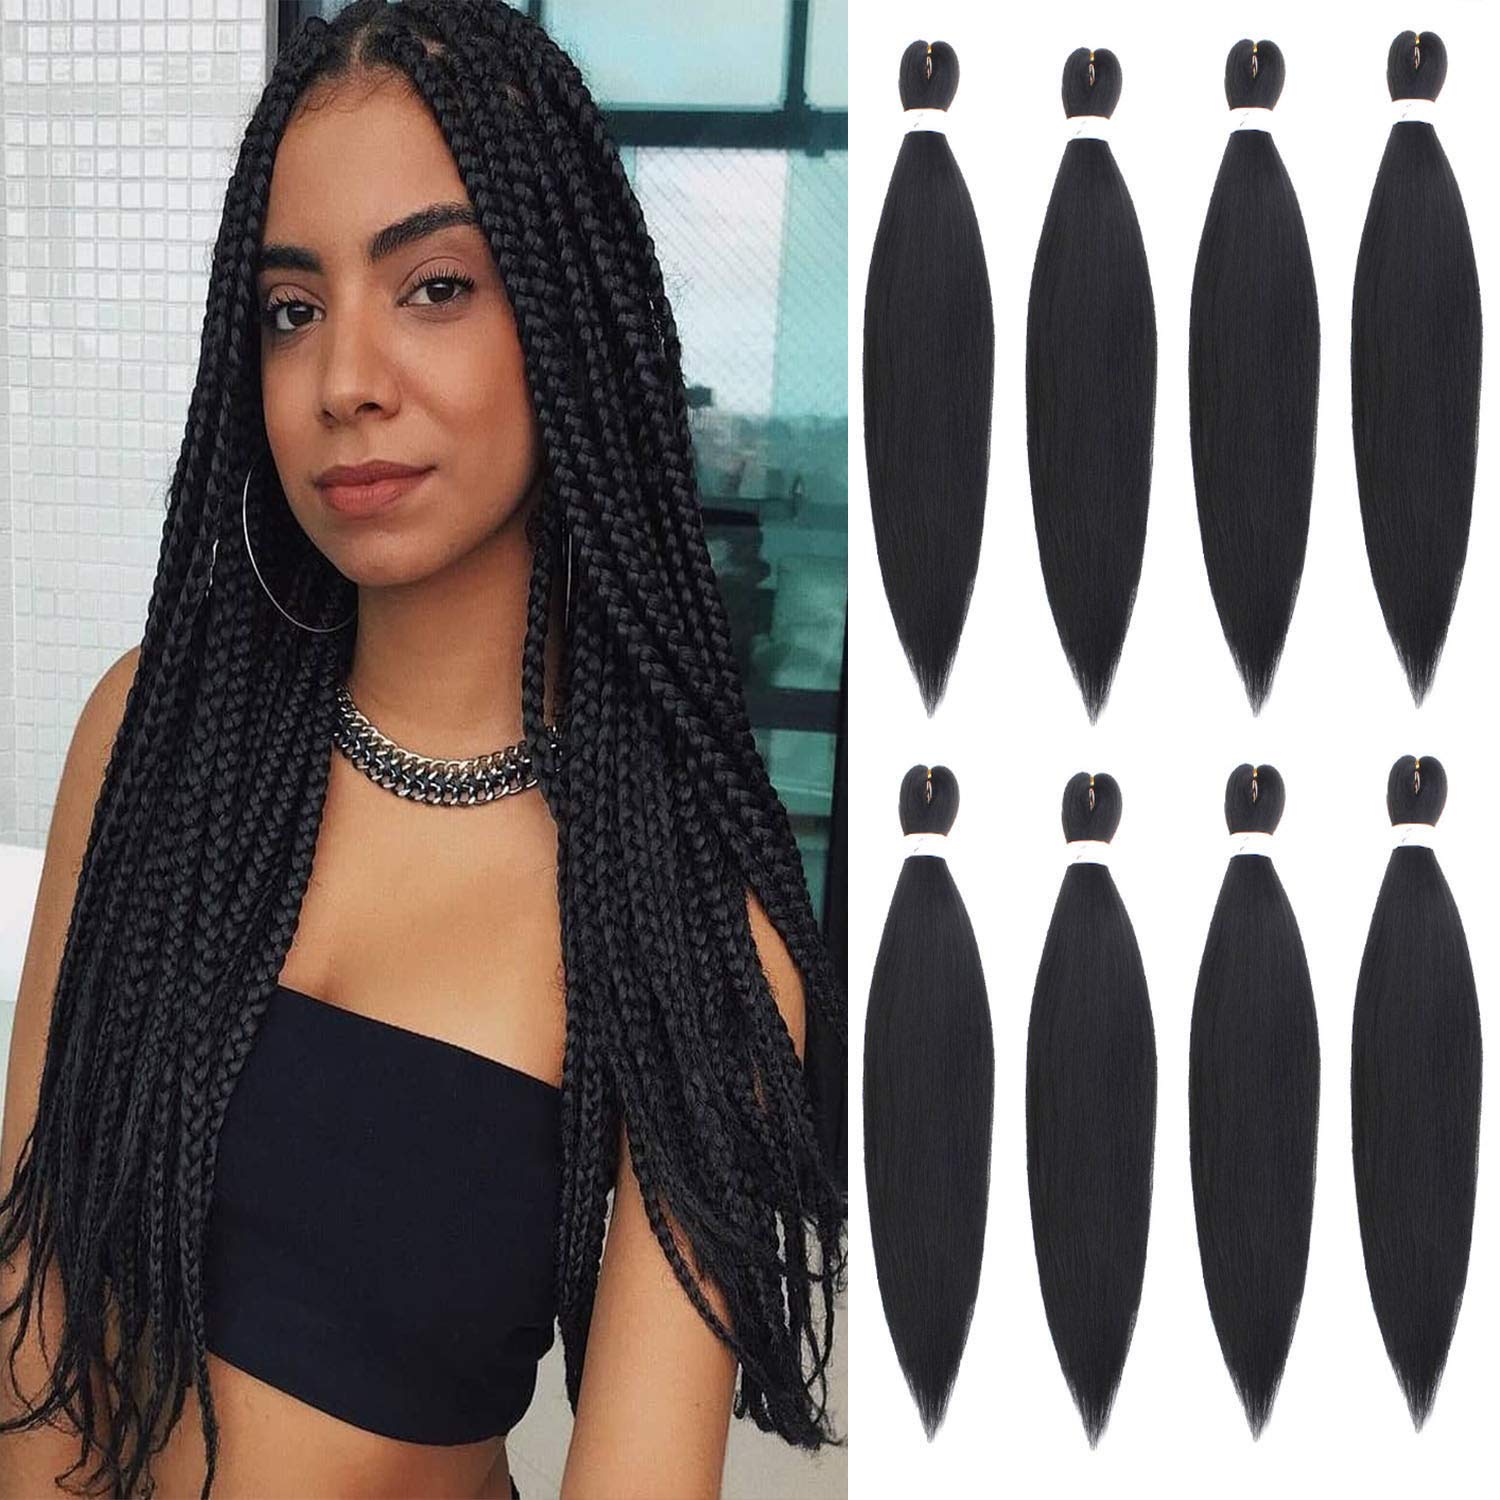 3 Packs Braiding Hair Pre Stretched, 32 inch Colored Braiding Hair Pre Stretched Long Braiding Hair Extensions, Human Hair Extensions, Soft Yaki